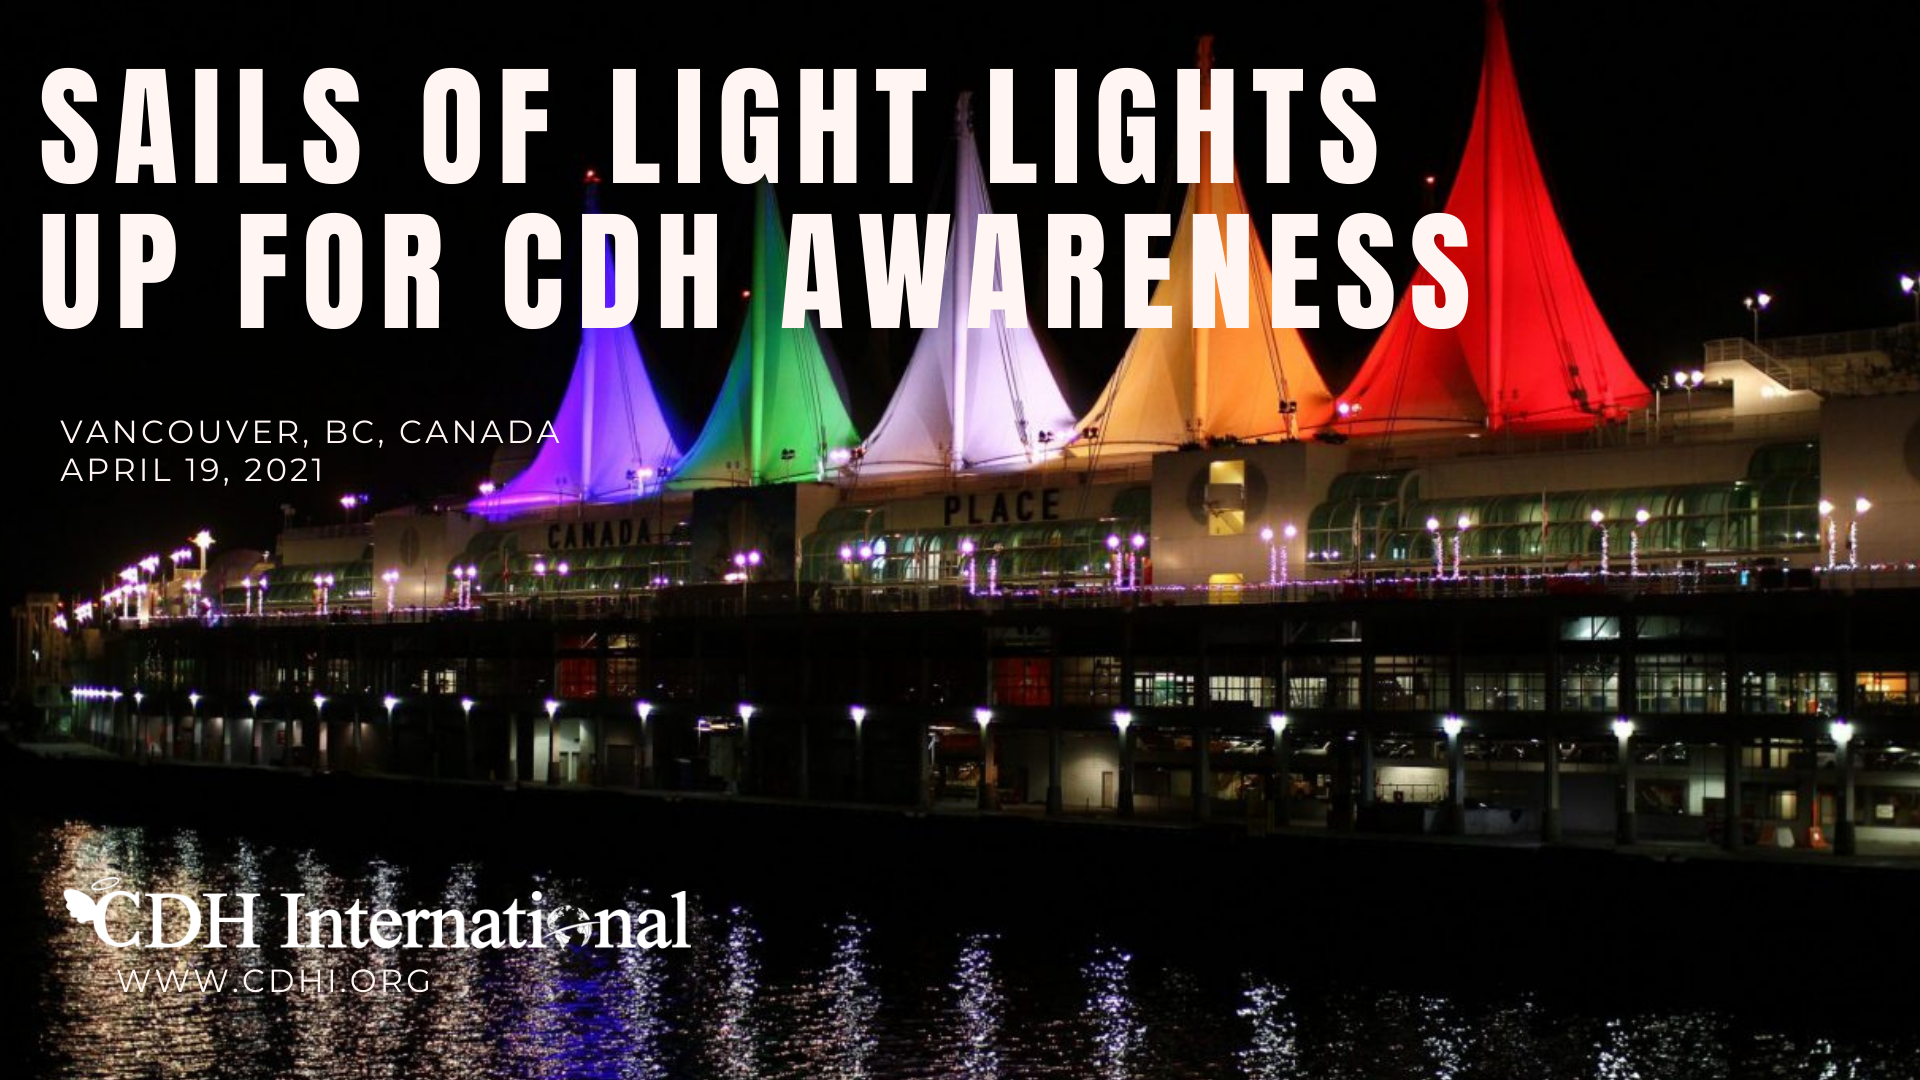 The Vancouver Convention Center Lights Up For CDH Awareness